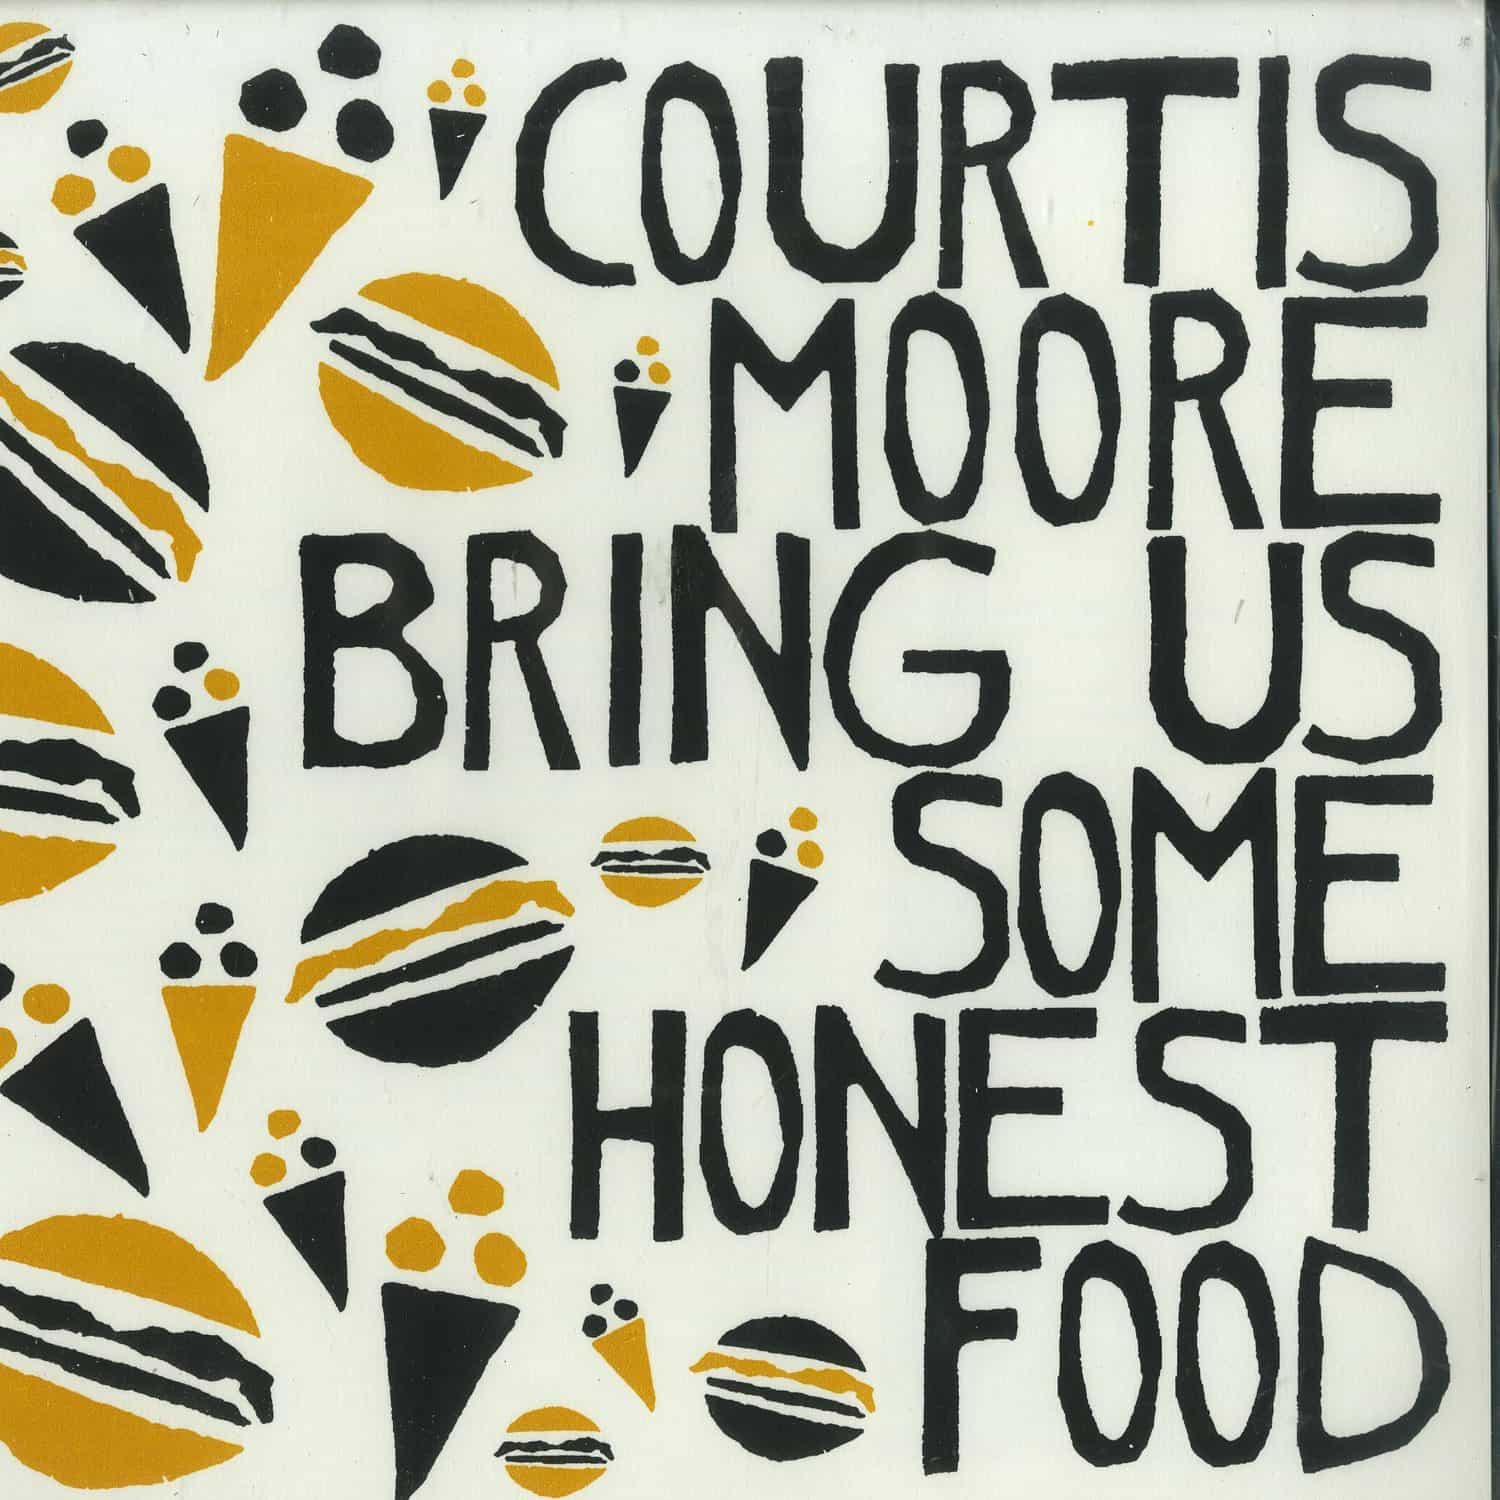 Alan Courtis & Aaron Moore - BRING US SOME HONEST FOOD 